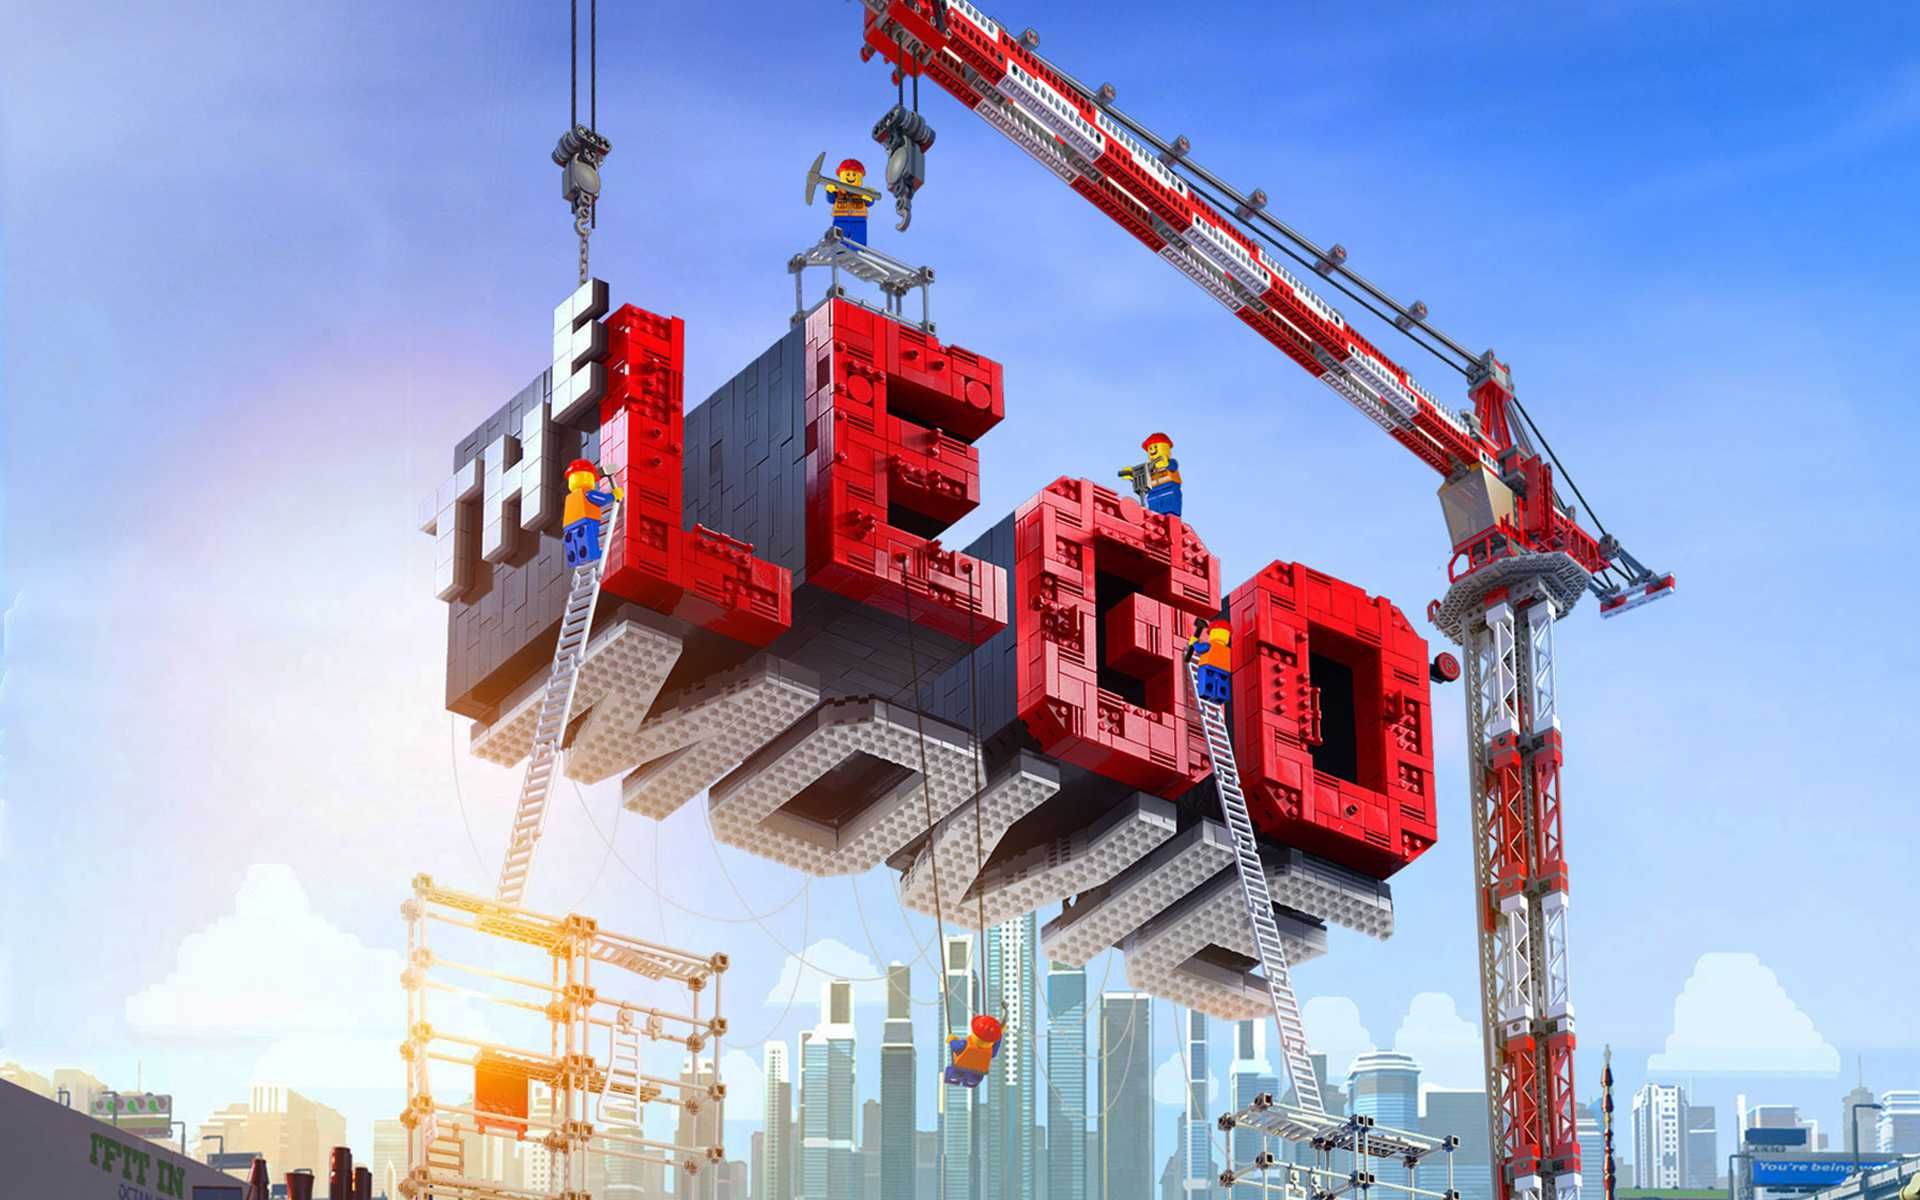 Animated advertisement for the new film The Lego Movie. 